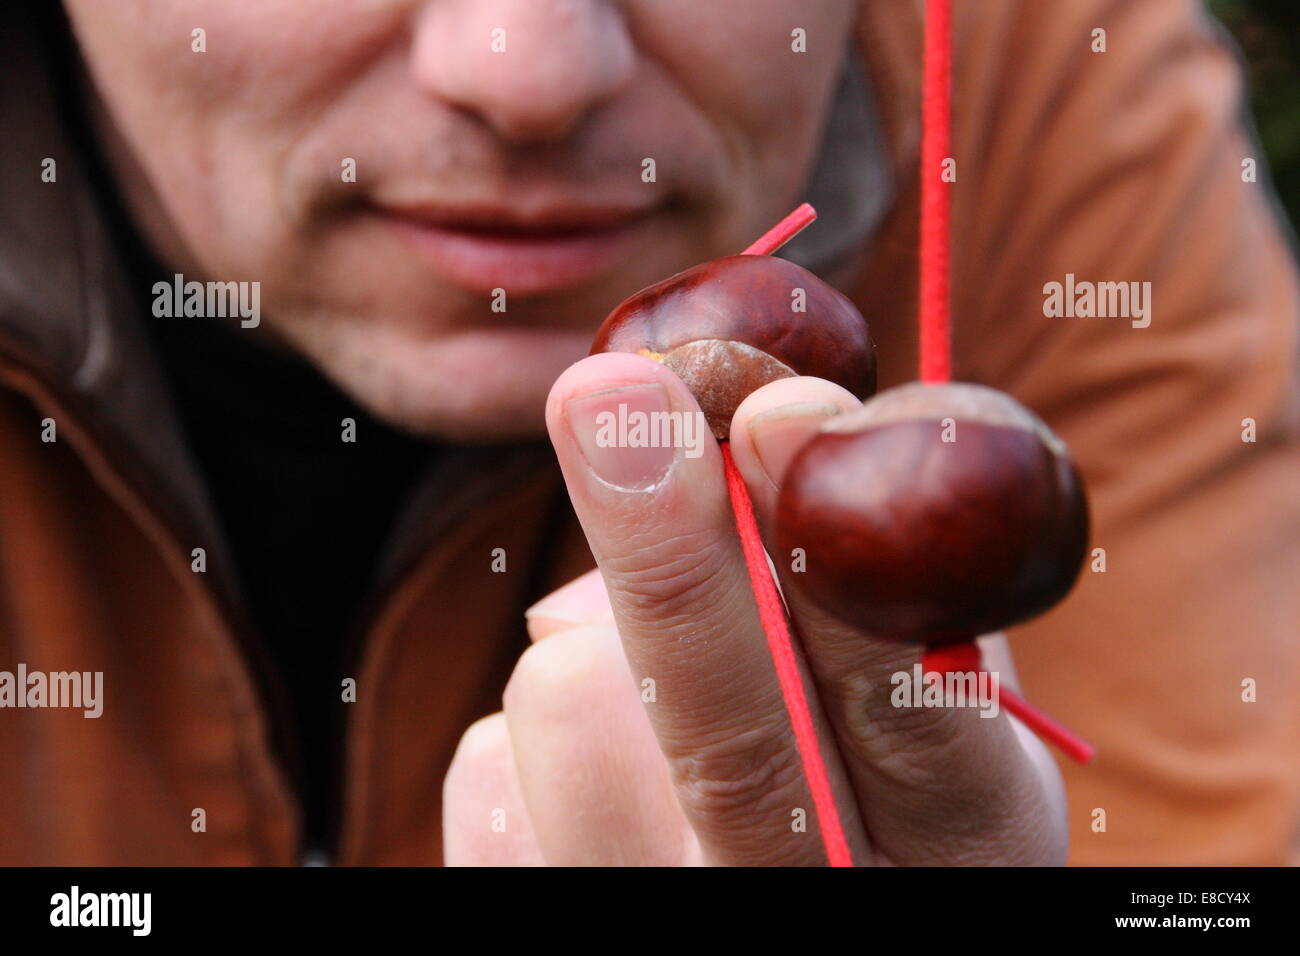 A man takes aim during a game of conkers, England, UK - autumn Stock Photo